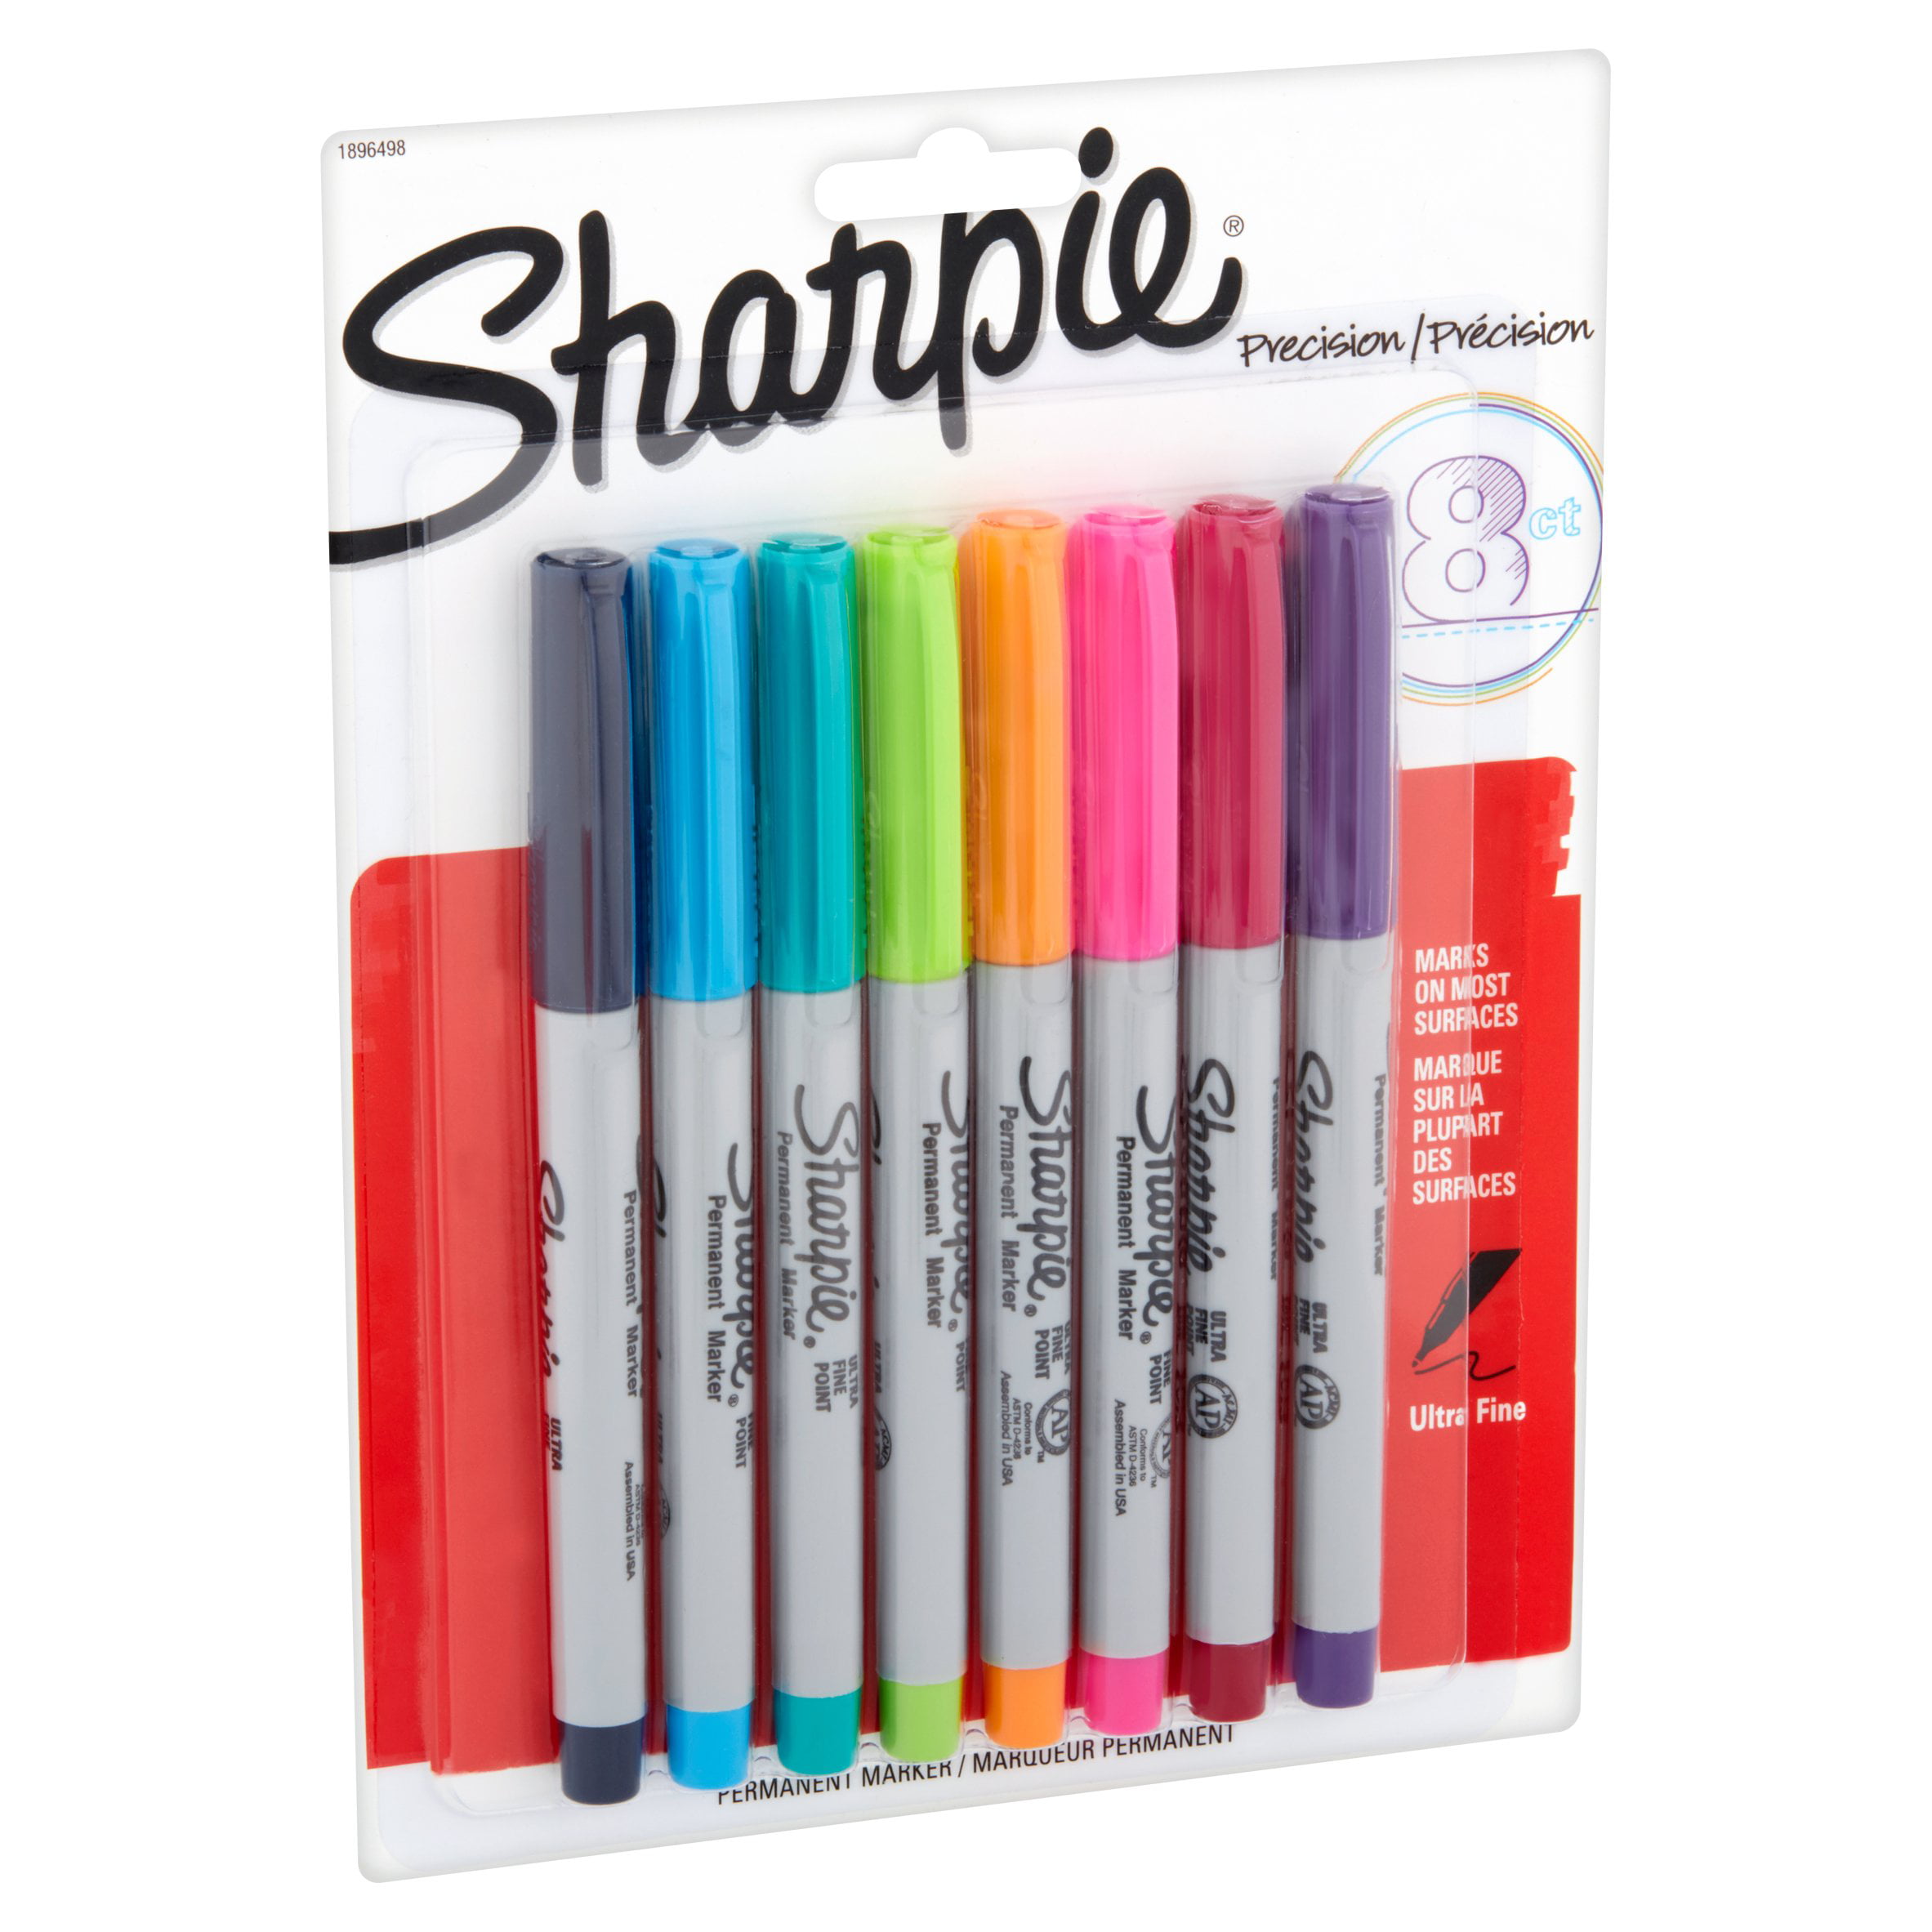 Sharpie Permanent Markers, Limited Edition, Assorted Colors Plus 1 Mystery  Marker, 60 Count $15 (Reg. $40) at Walmart